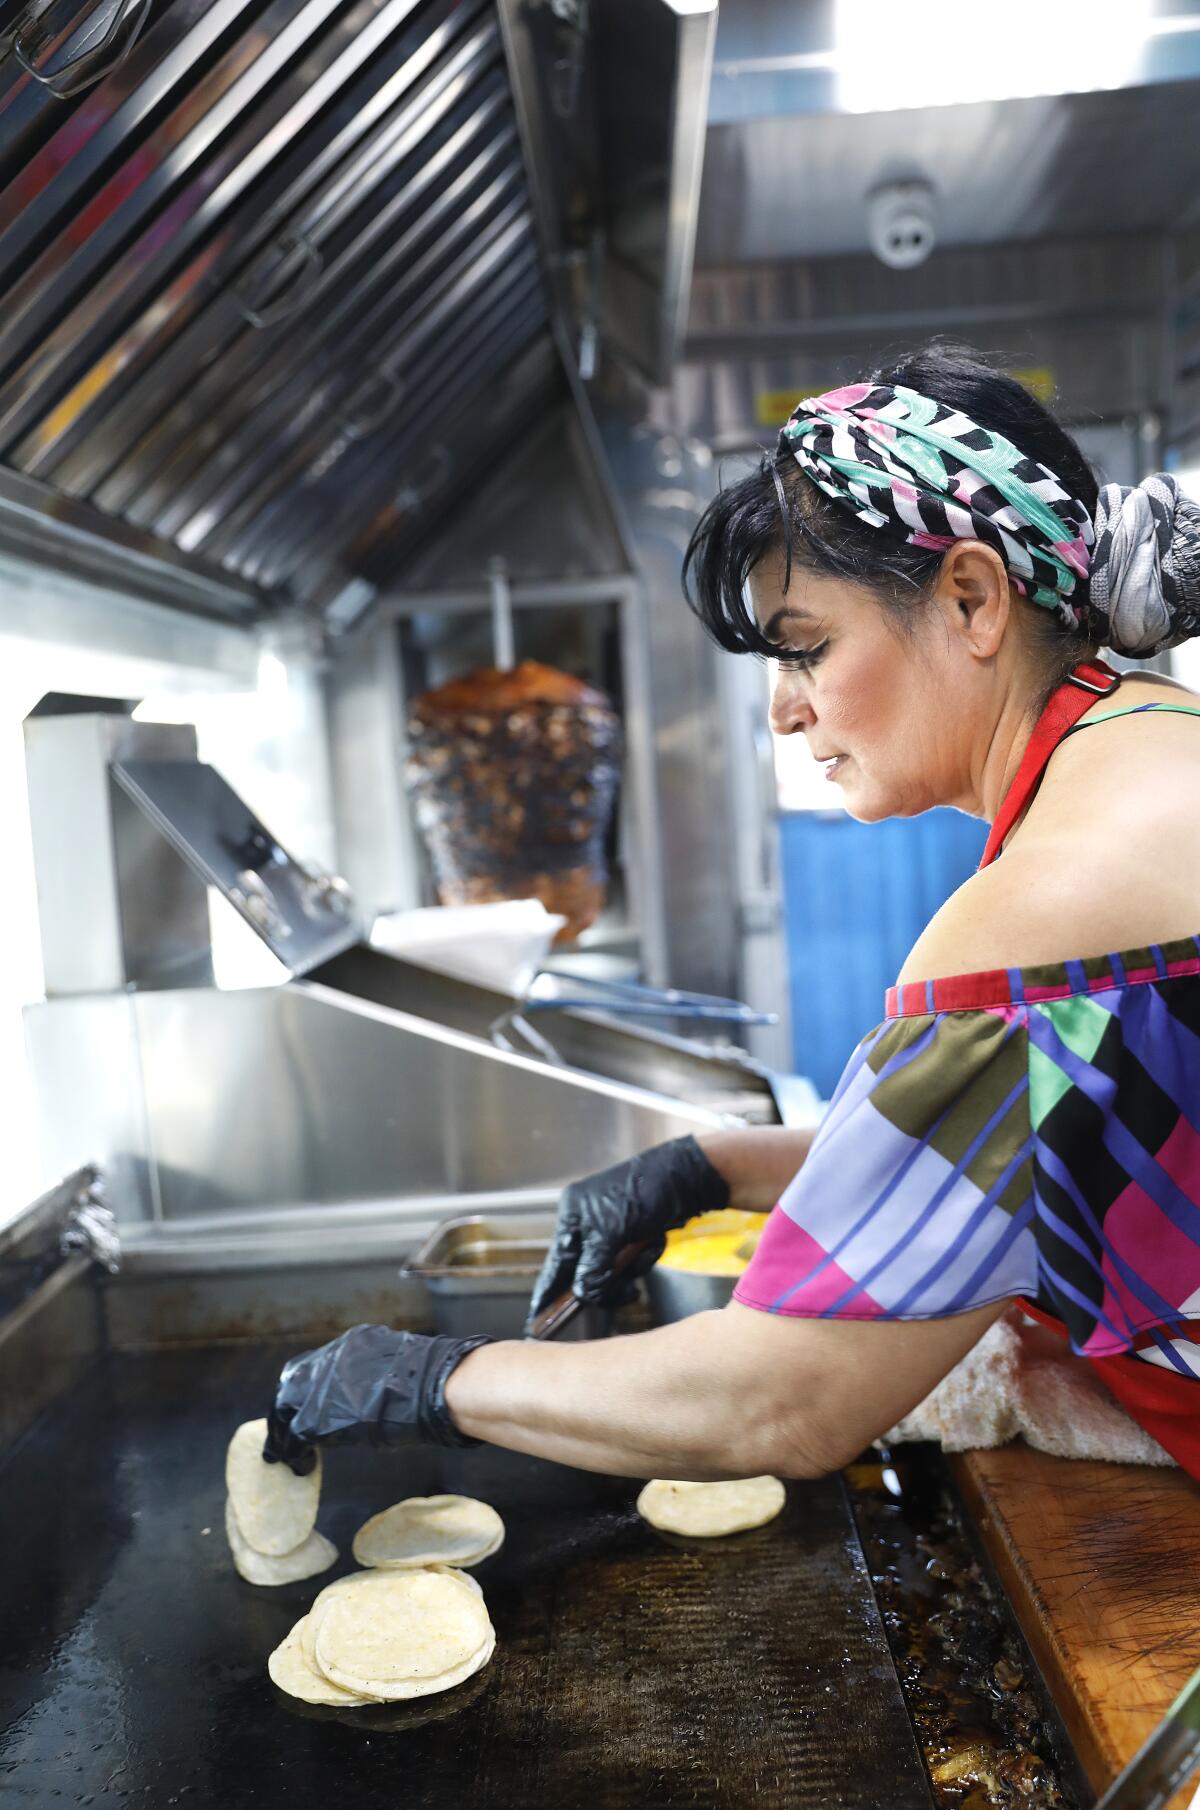 Maria Cárdenas cooks on the Tacos La Madrina truck parked in Hesperia.